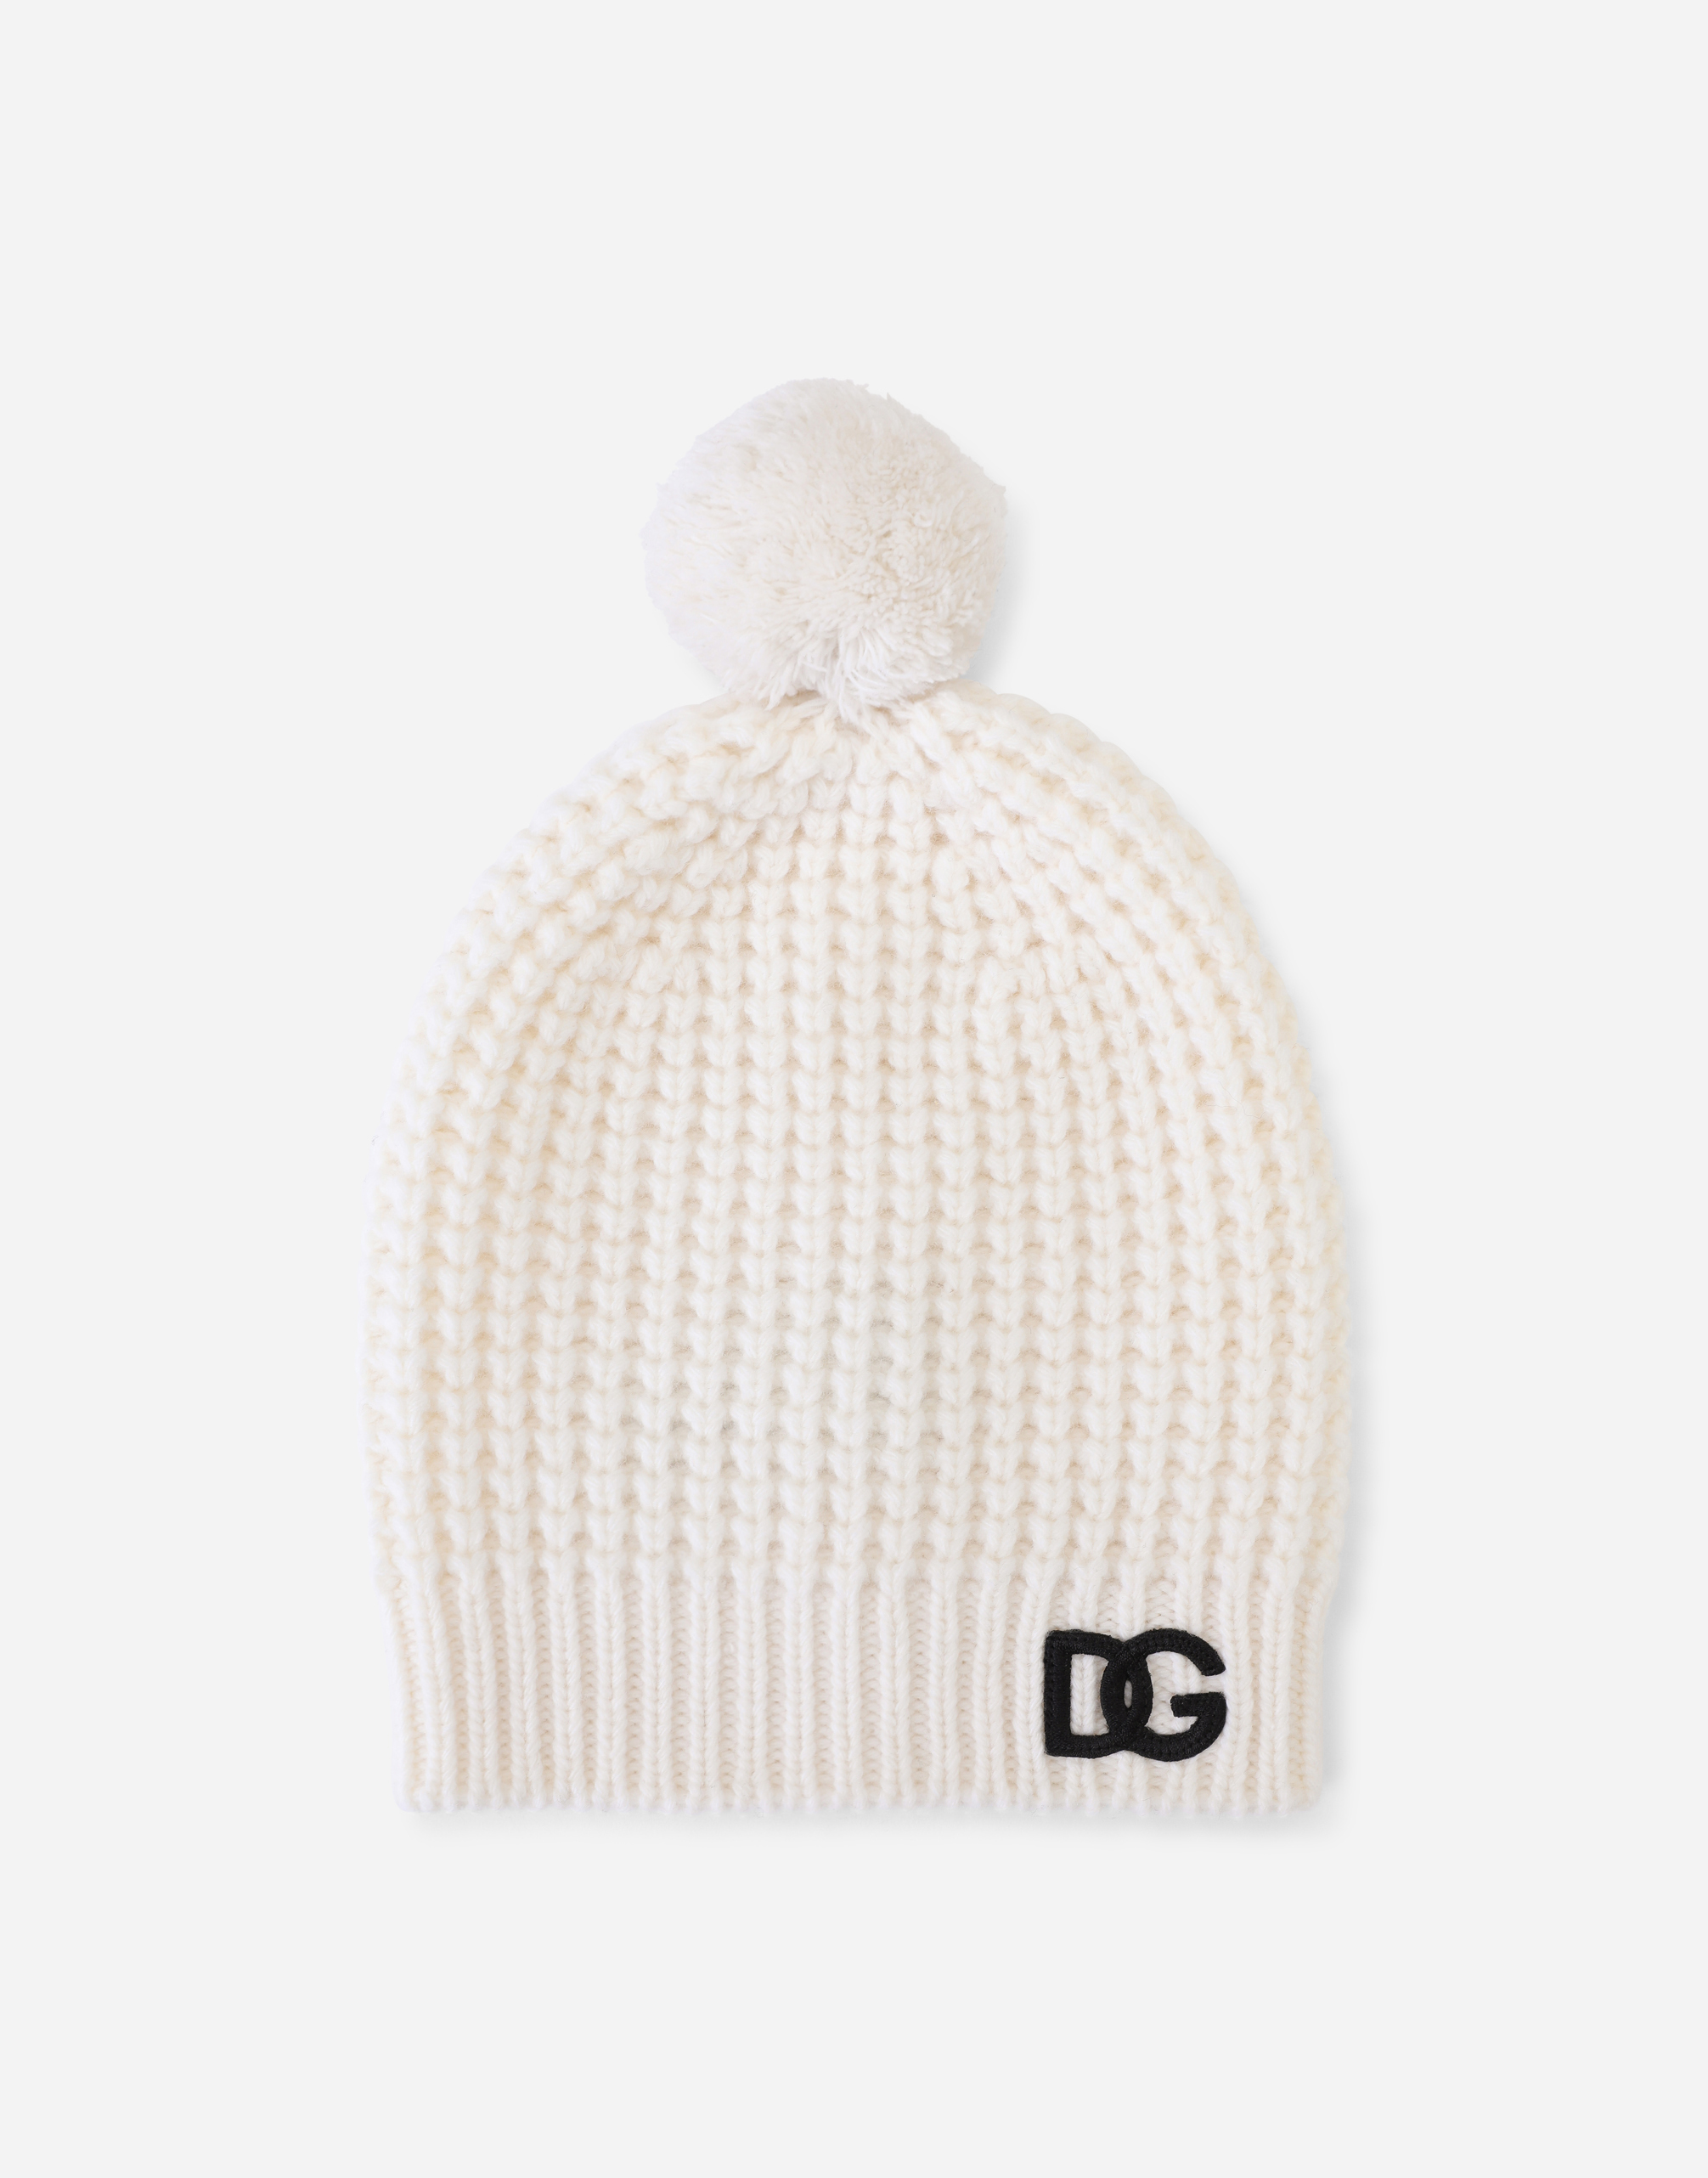 Basketweave-stitch hat with DG logo patch in White